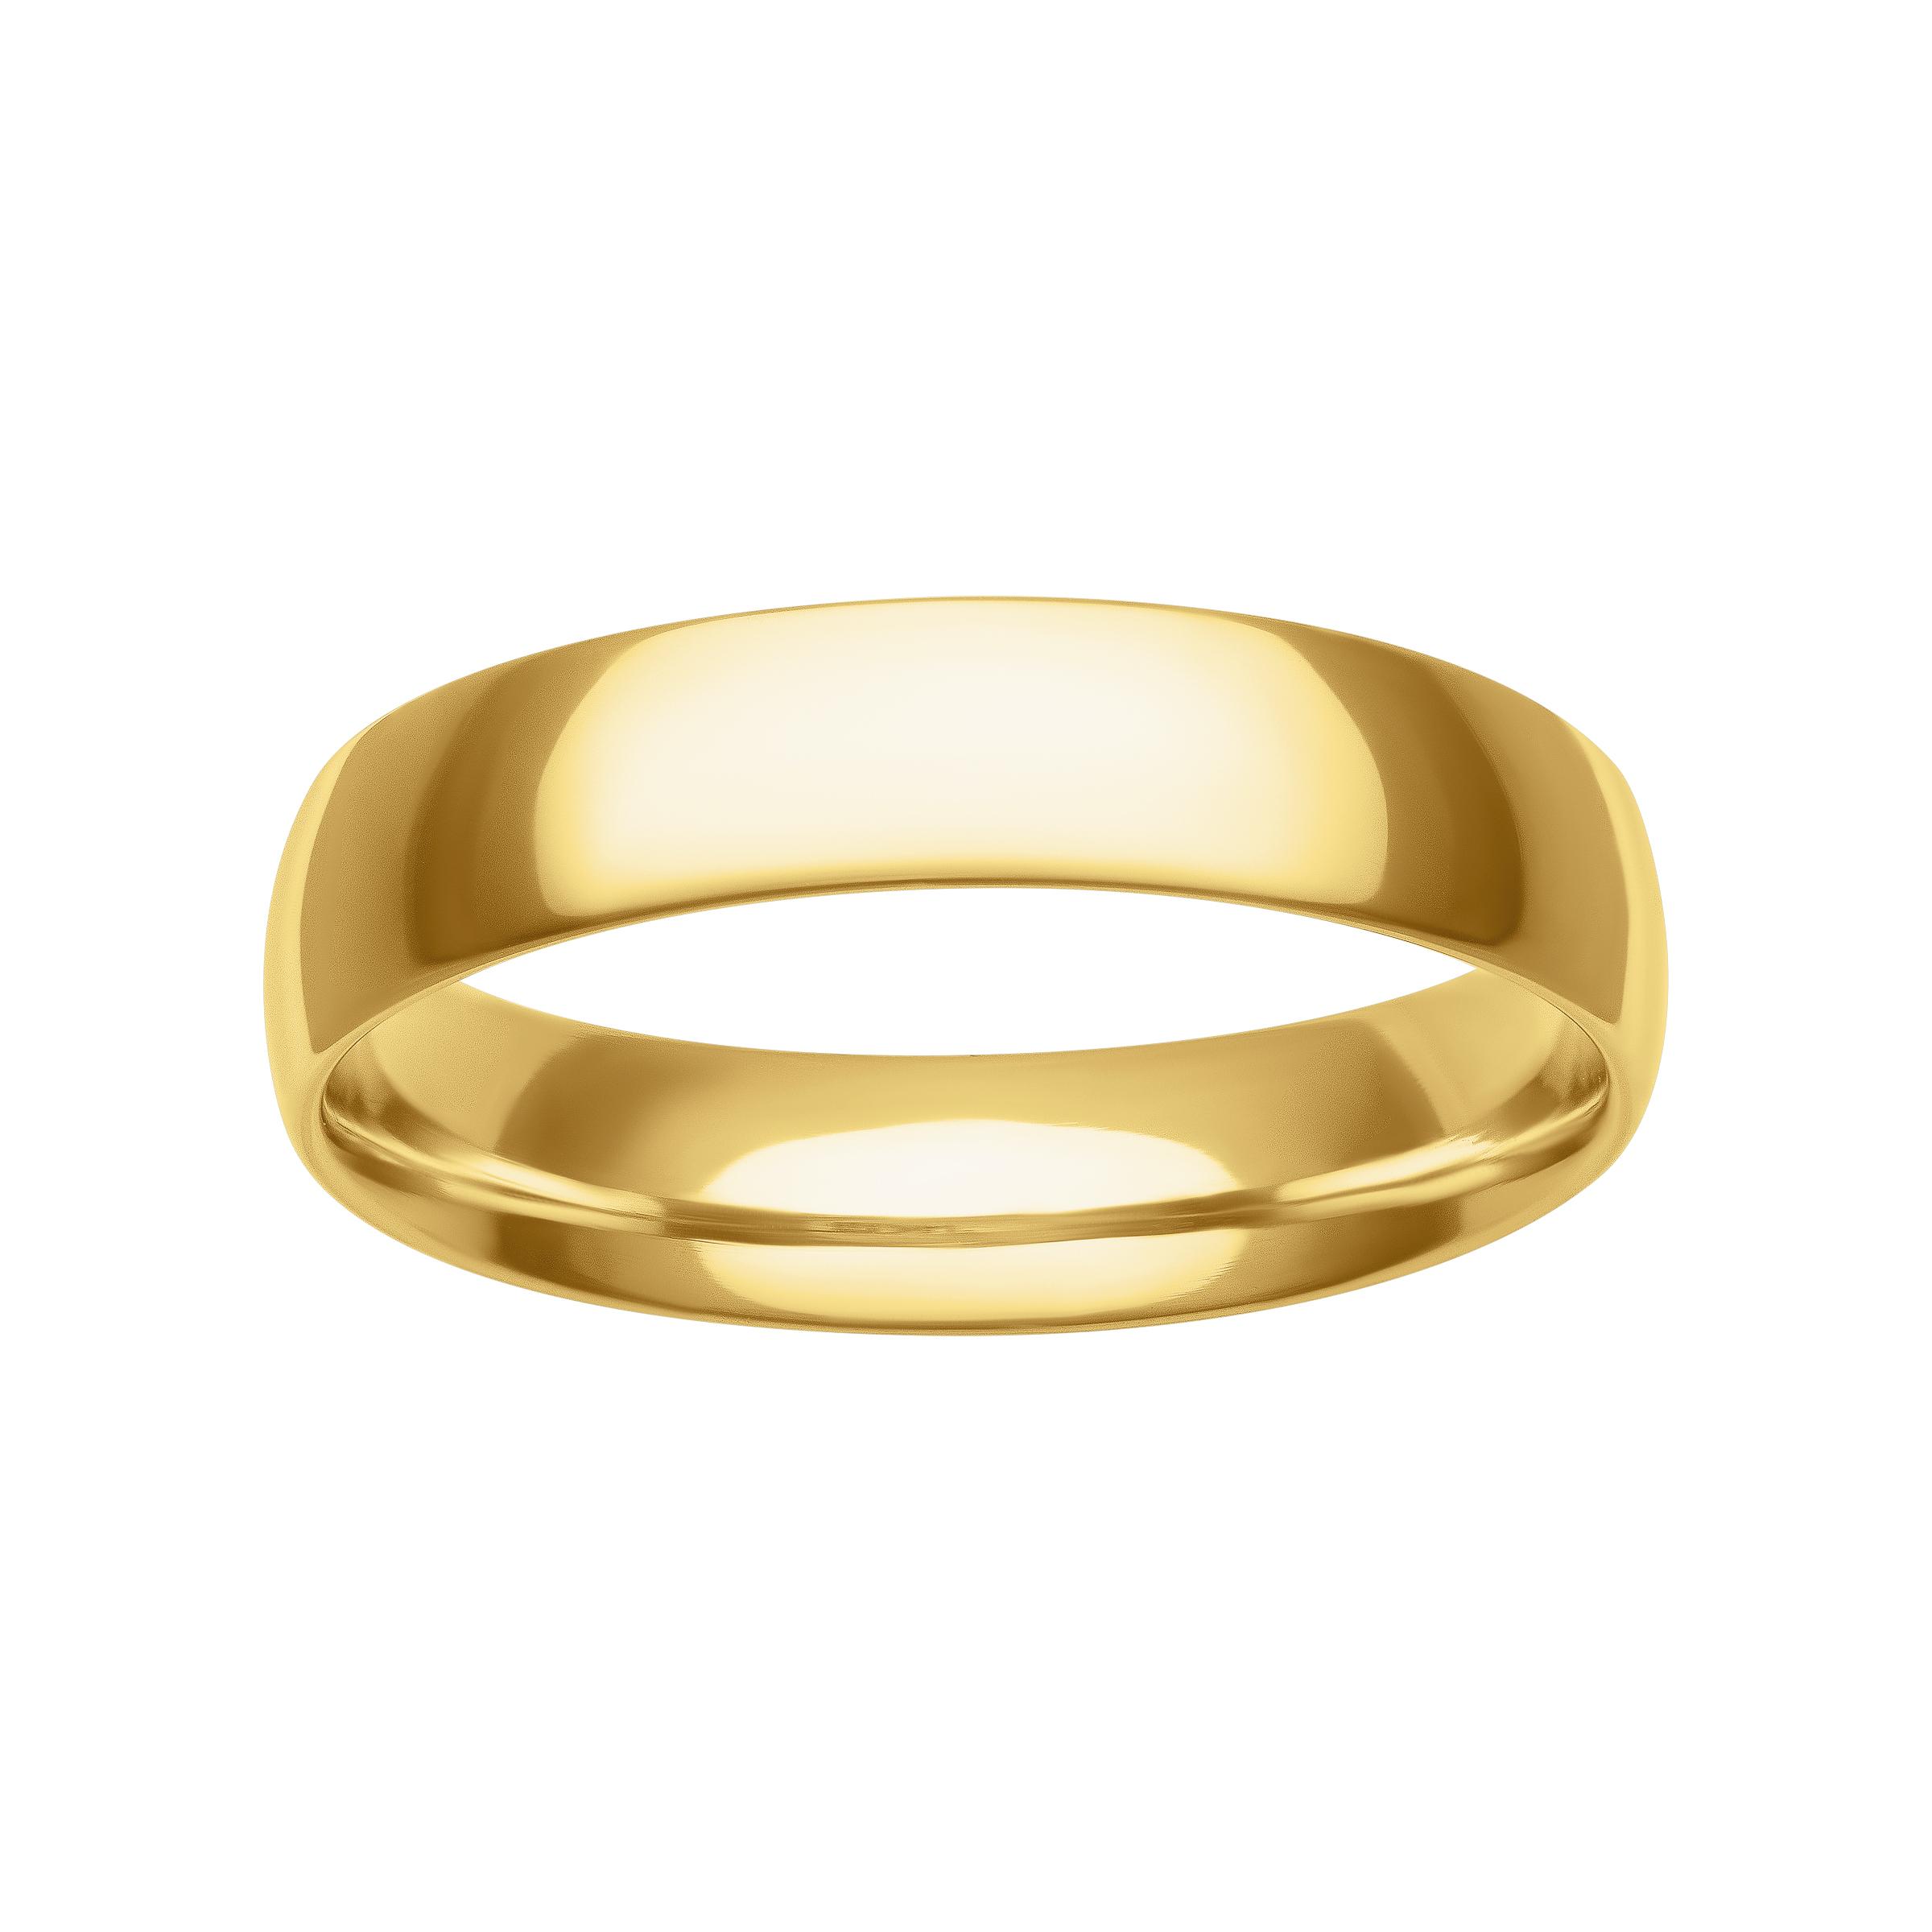 Gents 5mm 14k Yellow Gold Low Dome Comfort Fit Wedding Band